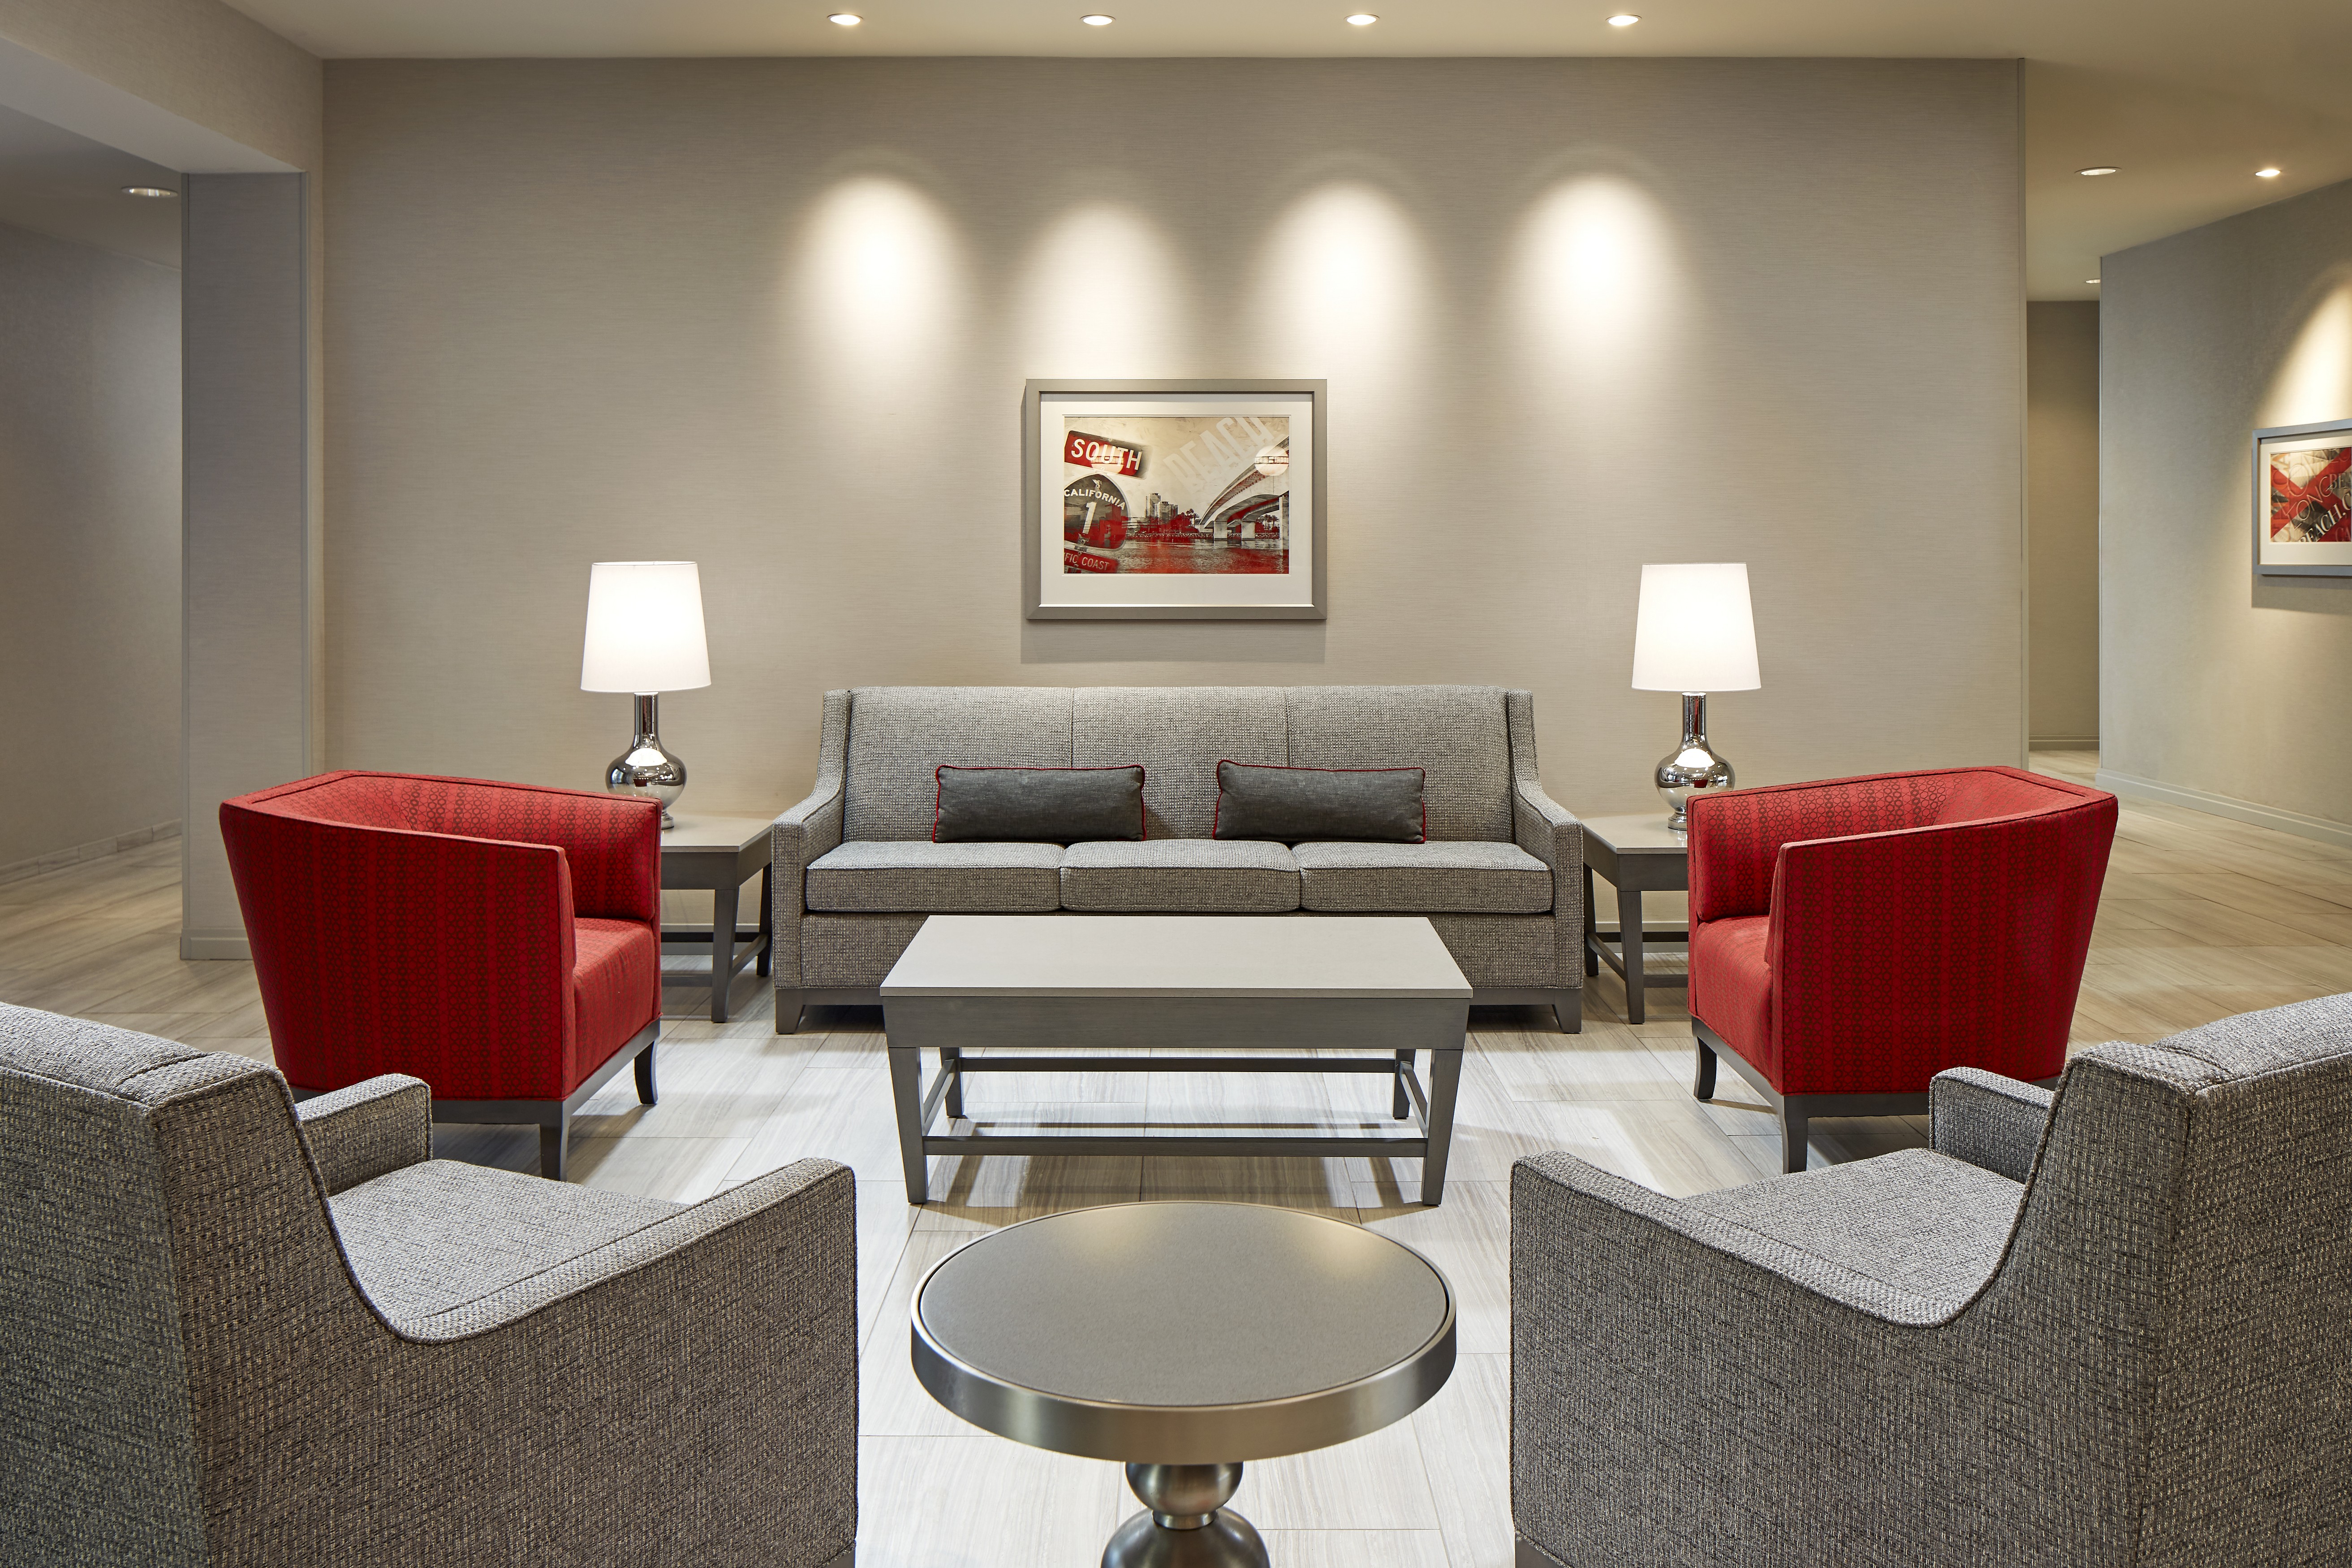 Lobby Seating Area with Armchairs, Coffee Table and Sofa